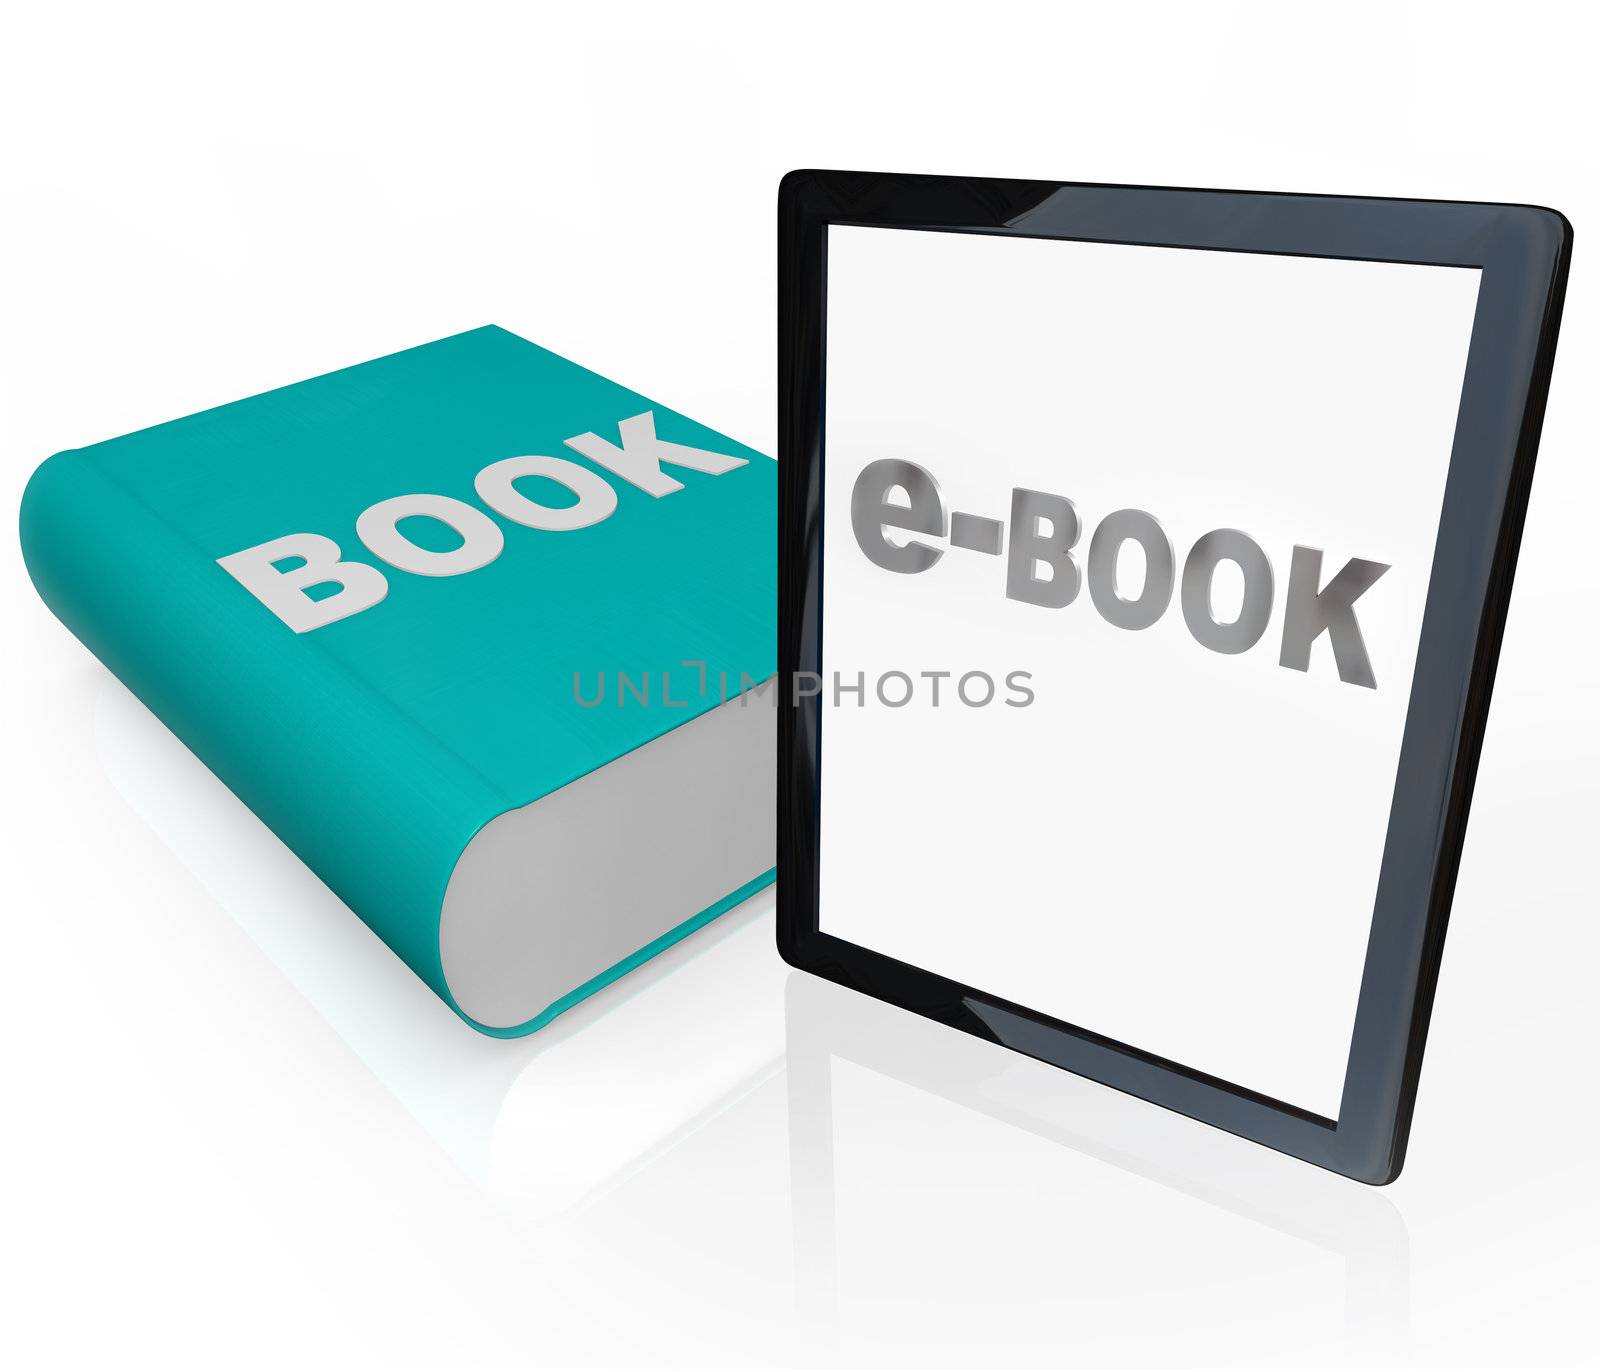 A traditional printed book next to a new e-book, symbolizing the current battle and comparison readers make between choosing a book in old-fashion print vs electronic media